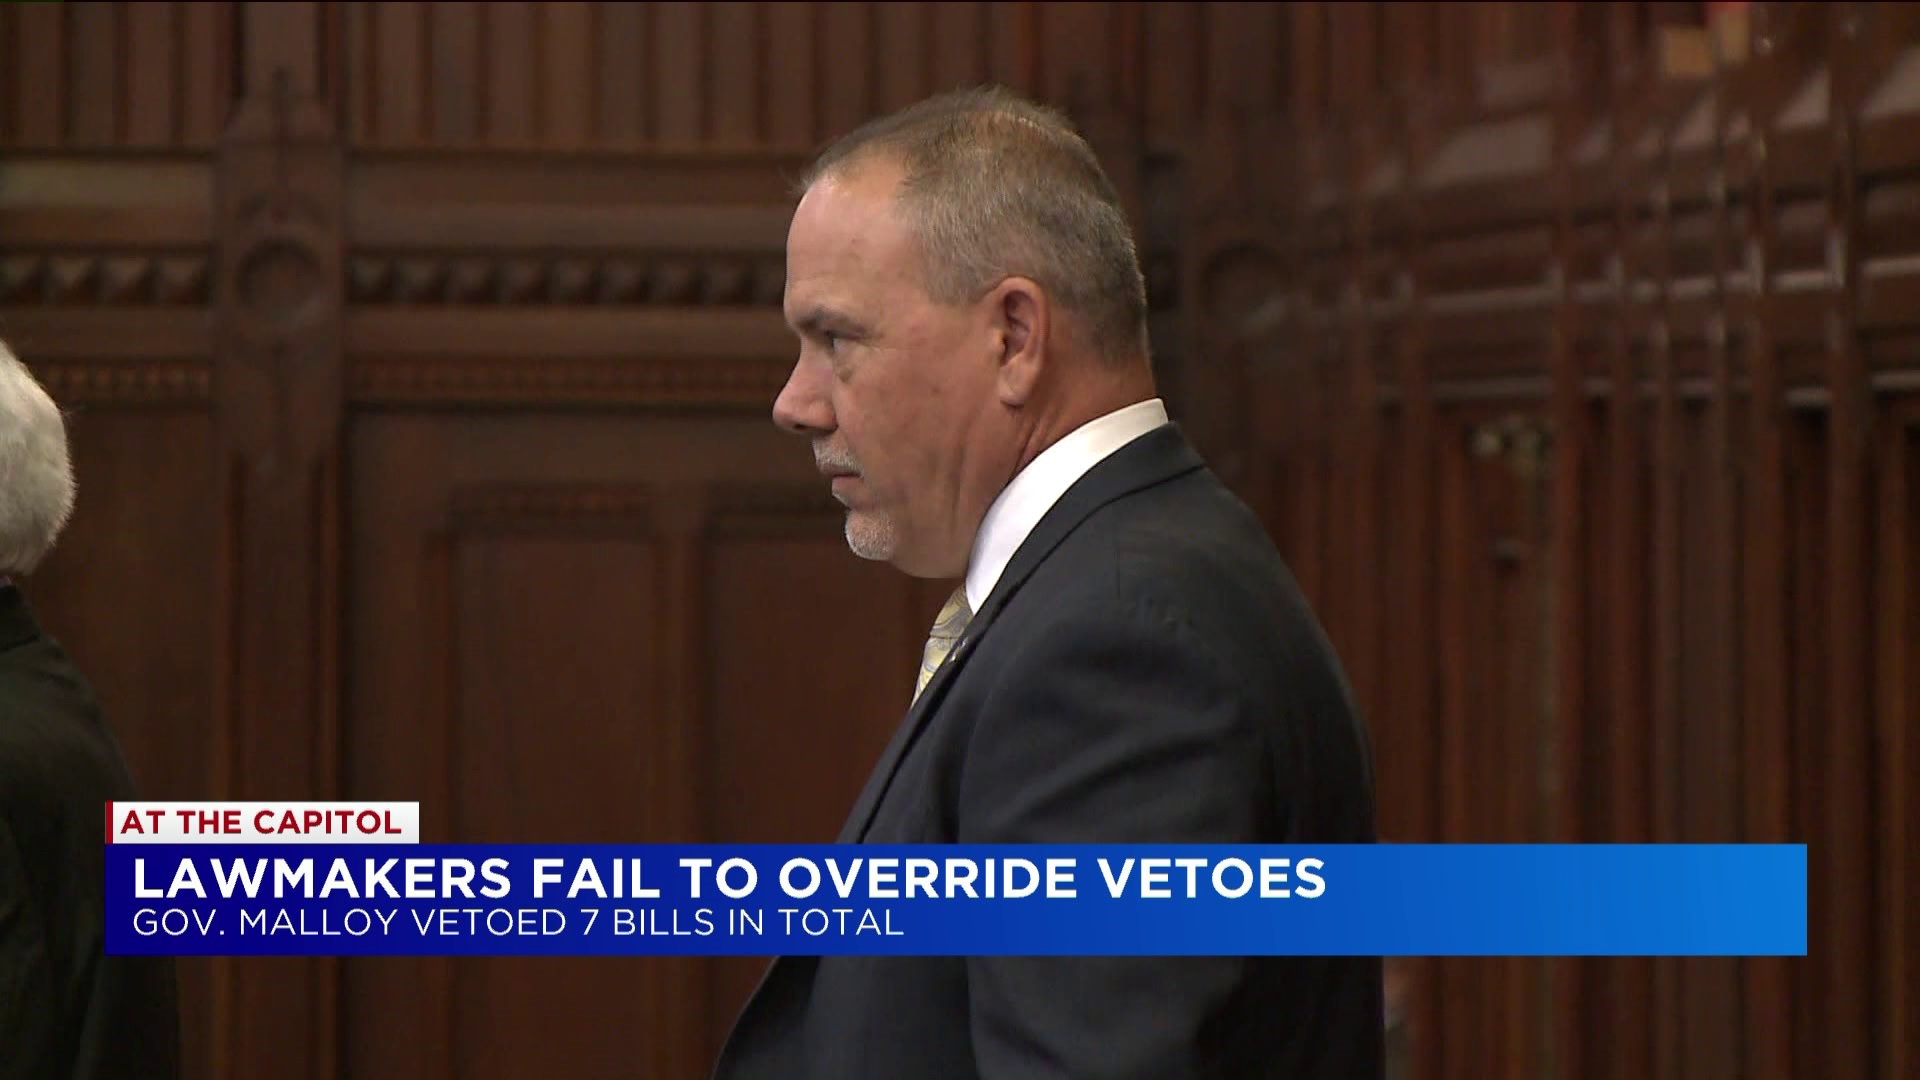 All seven of Governors vetoes stand despite opposition